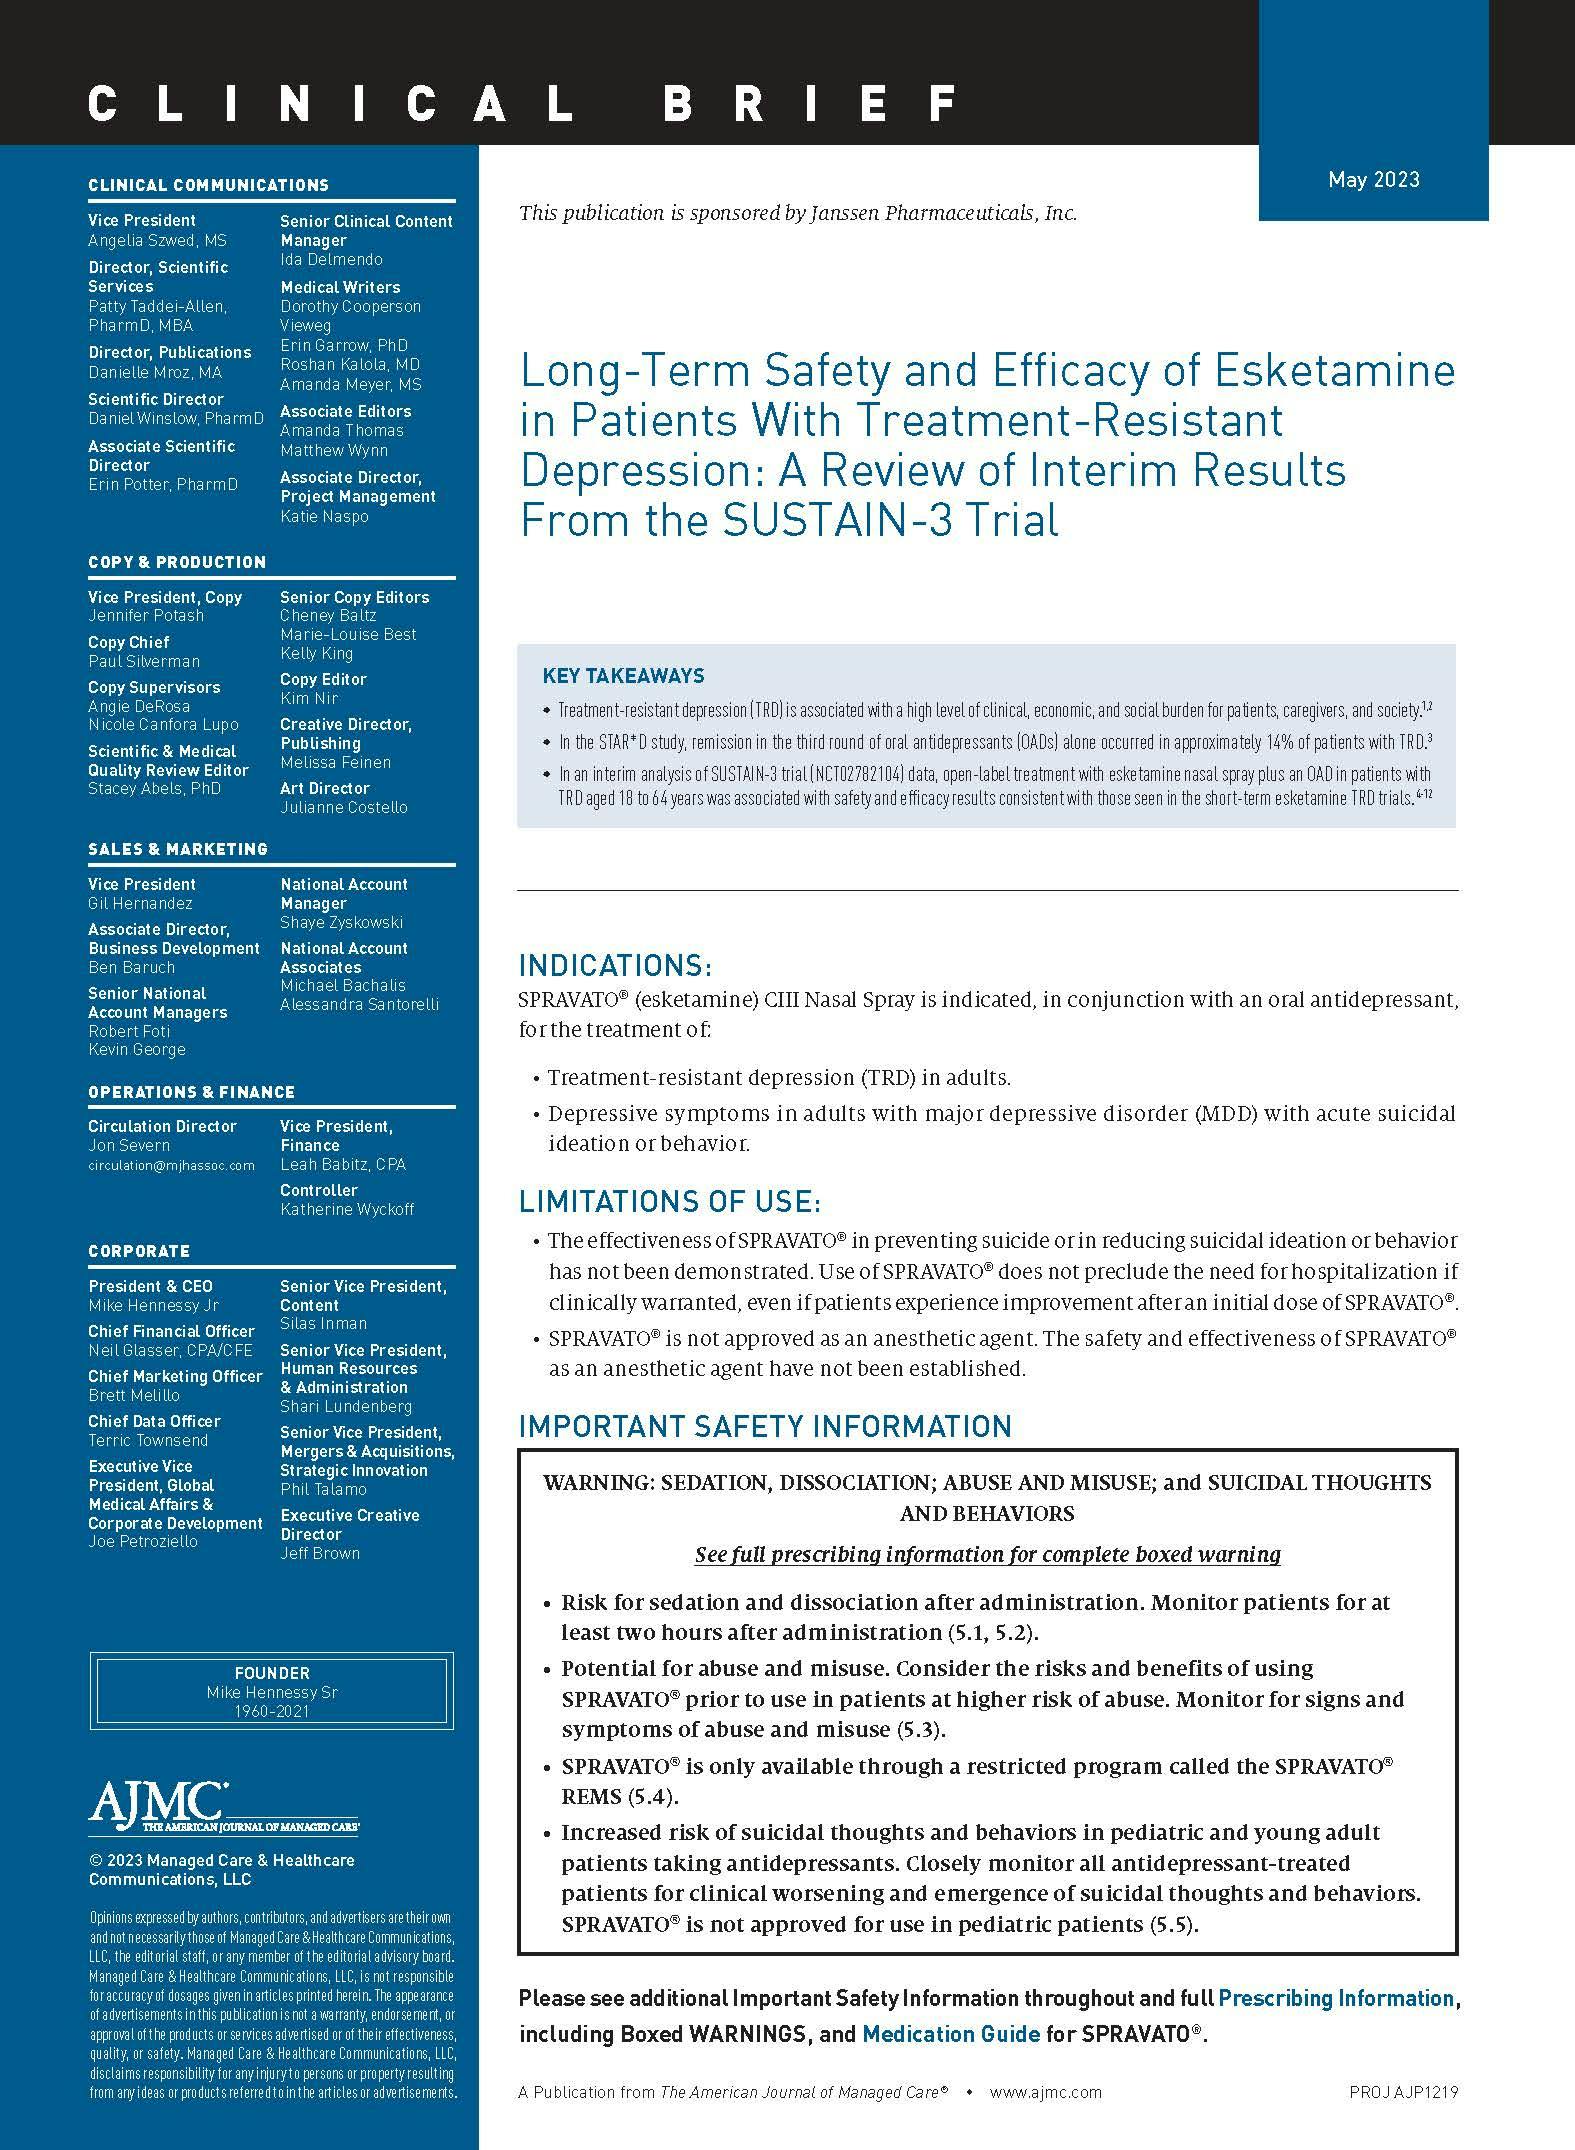 Long-Term Safety and Efficacy of Esketamine in Patients With Treatment-Resistant Depression: A Review of Interim Results From the SUSTAIN-3 Trial